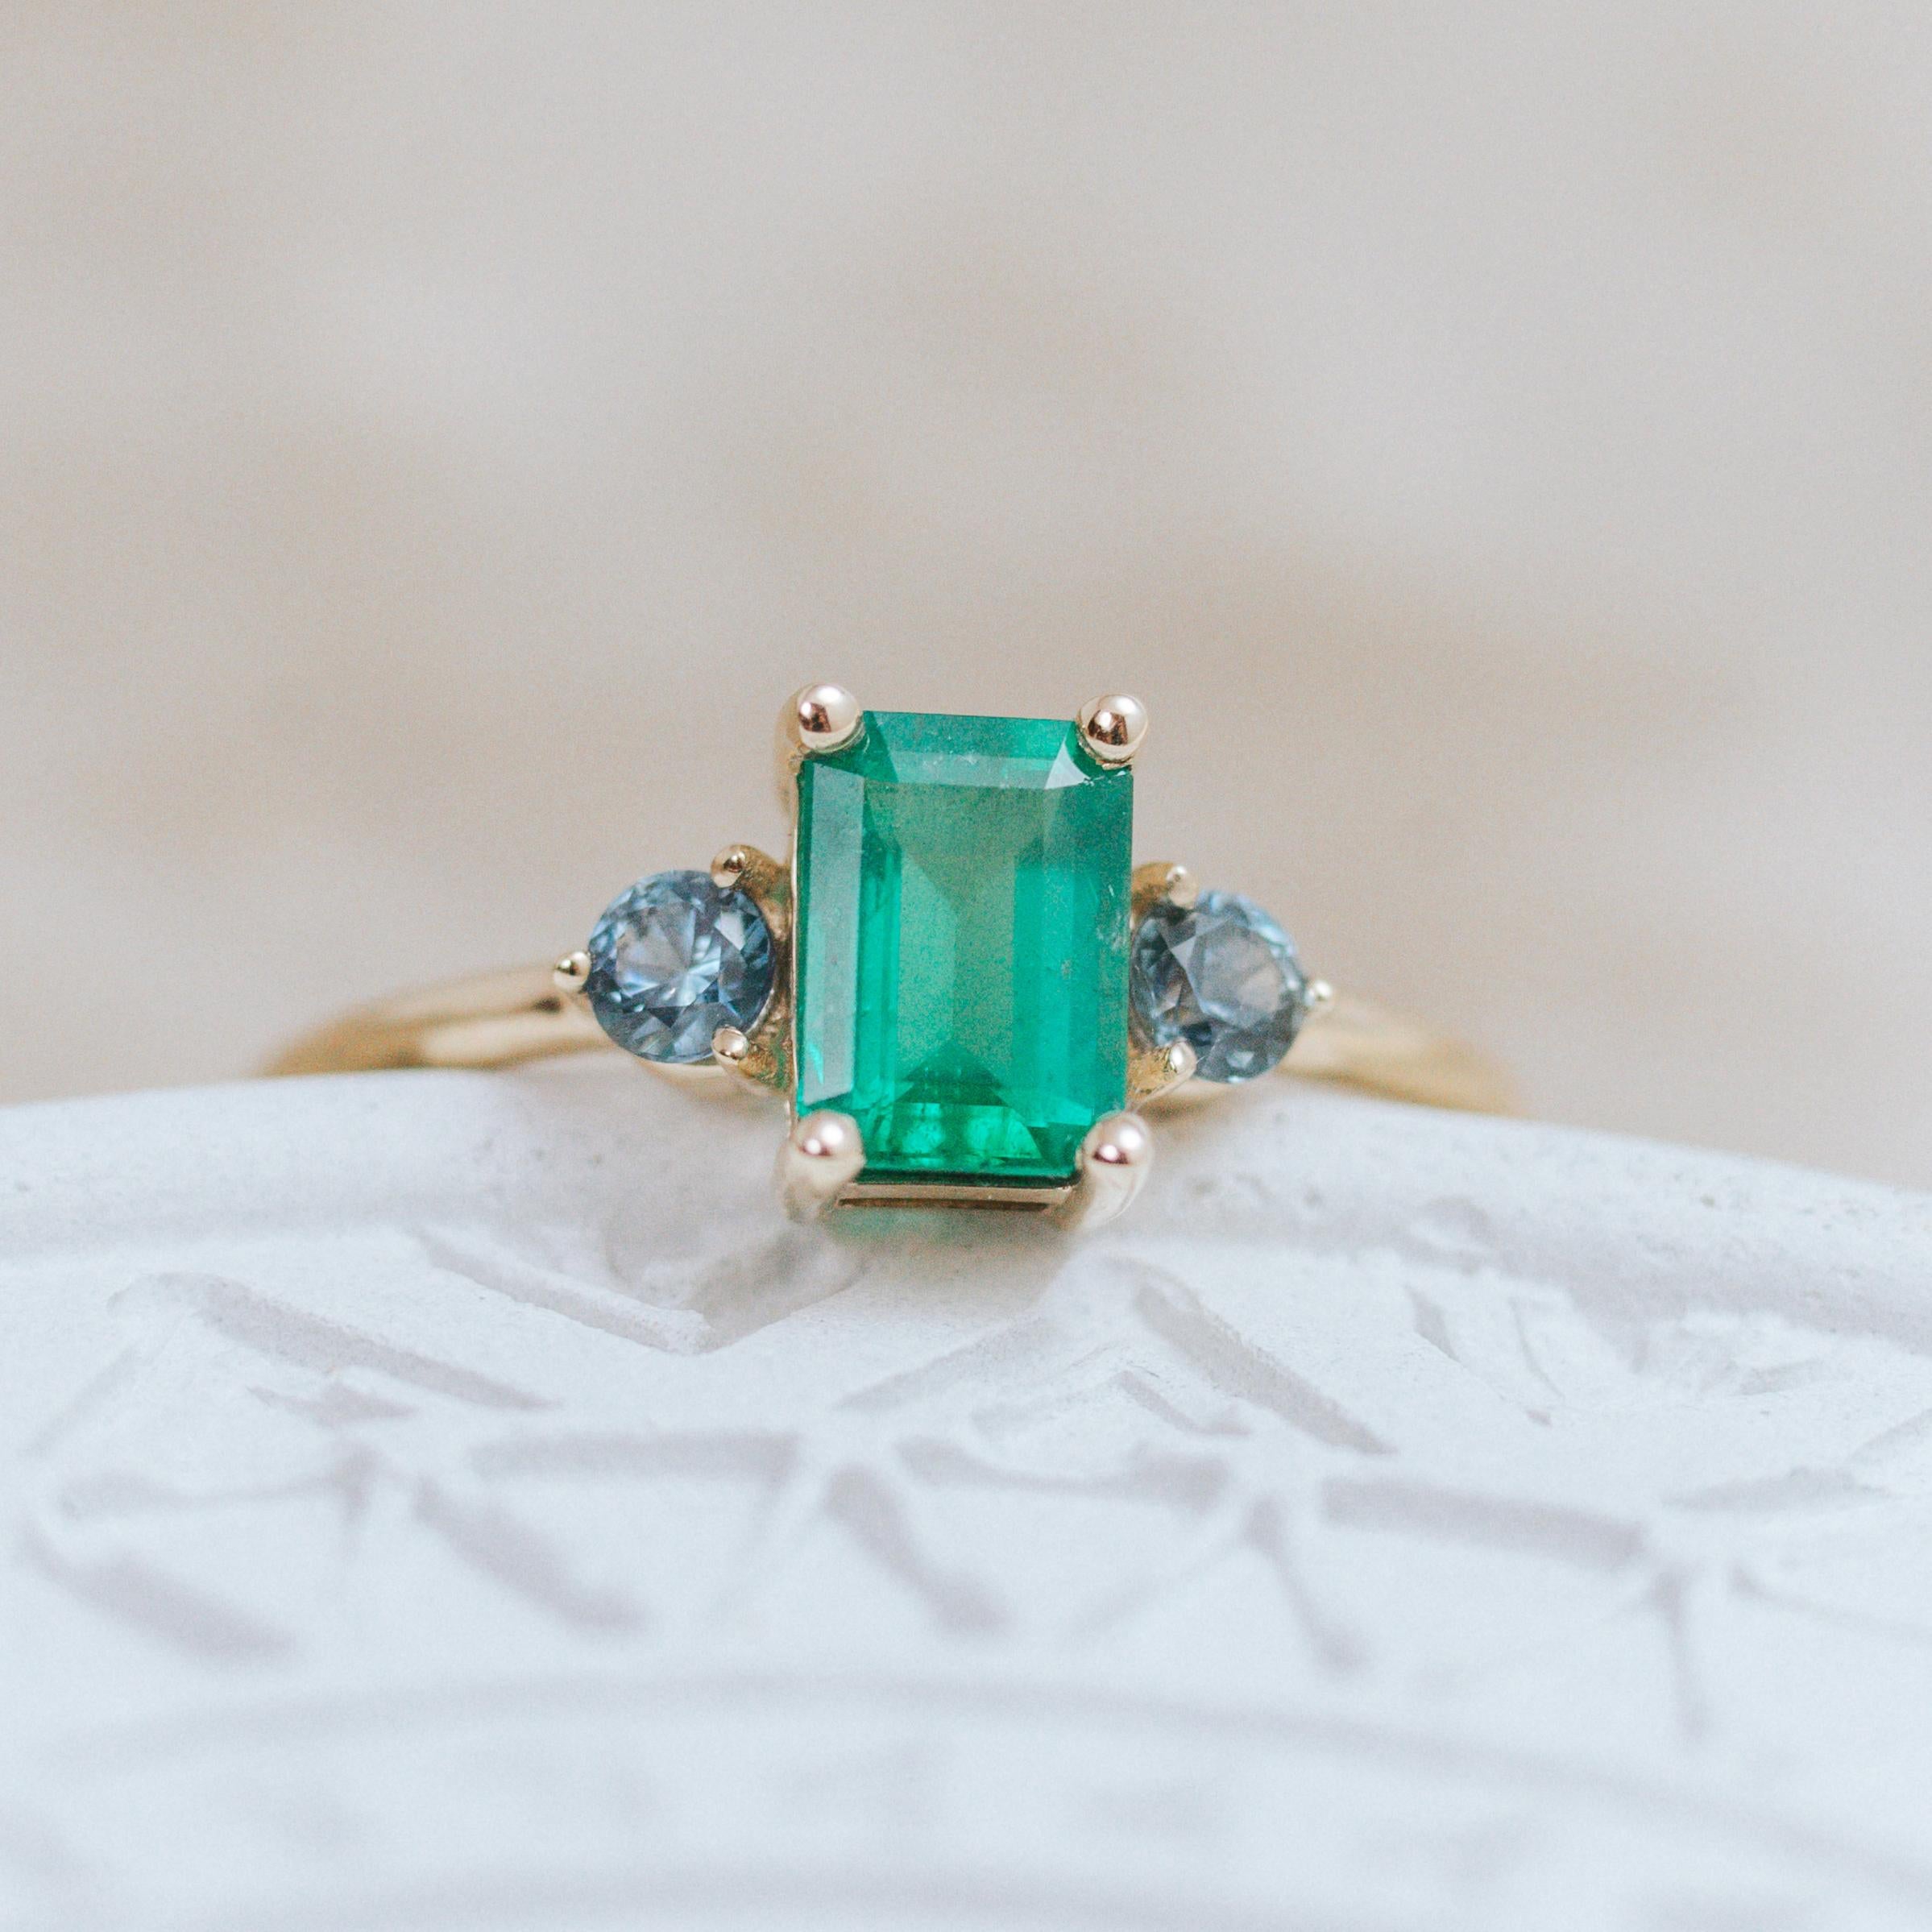 Ring in 14k yellow gold, set with emerald from Brazil and Montana sapphires.
This ring takes us to the shores of the blue ocean and the green jungles of Maui.
The ring is made in 14k yellow gold, set with a natural emerald 0.91ct, emerald-cut,